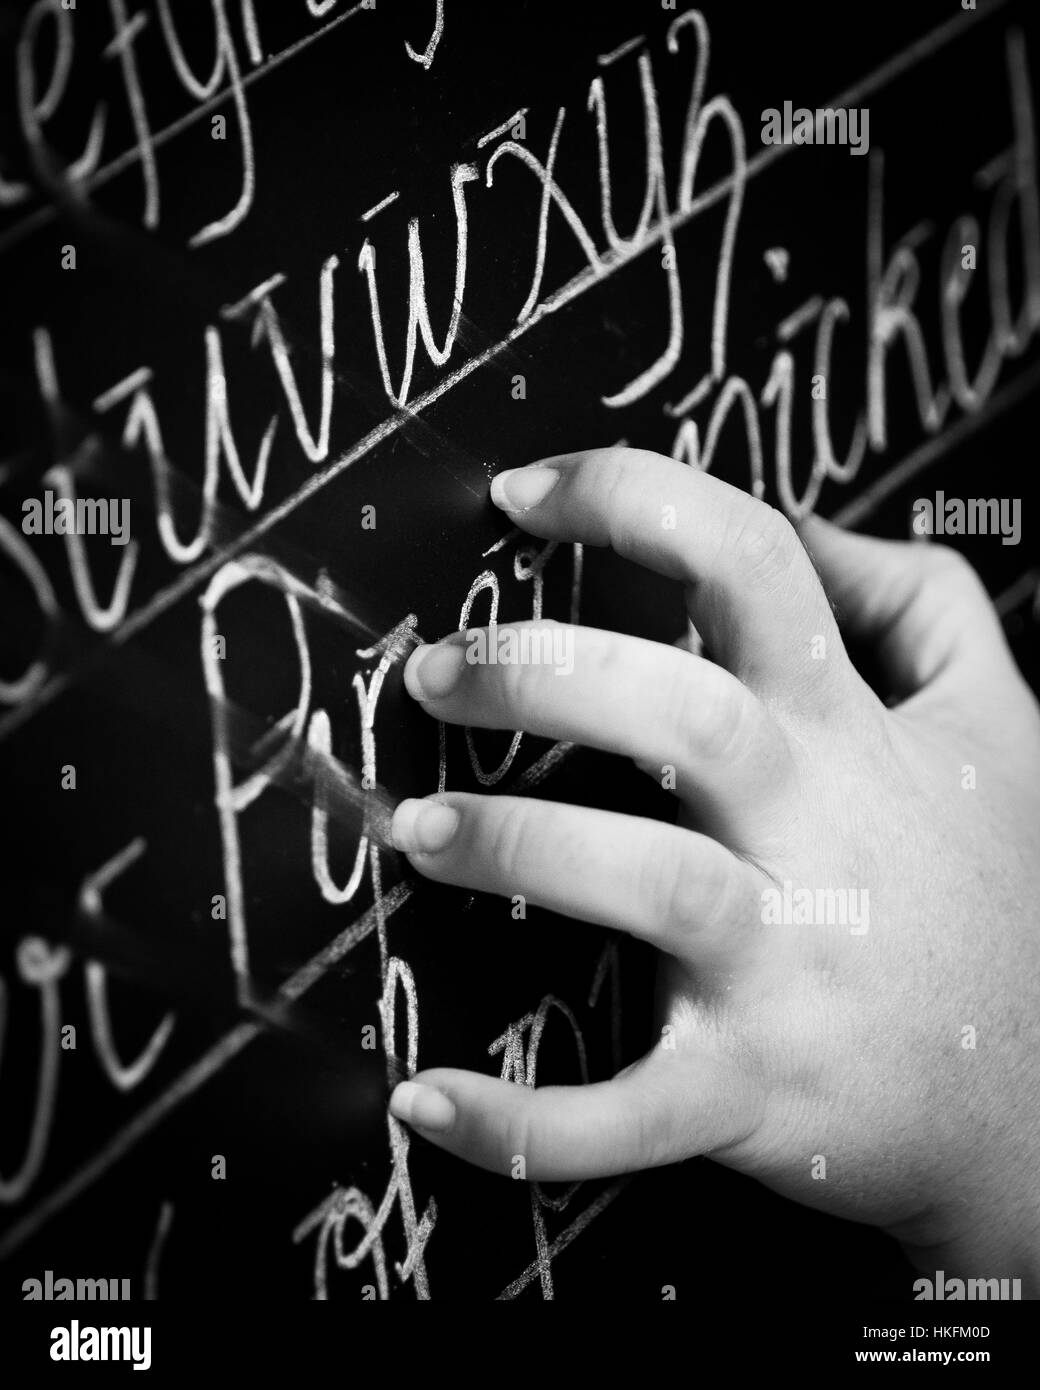 Finger nails scratching down black board with chalk writing Stock Photo